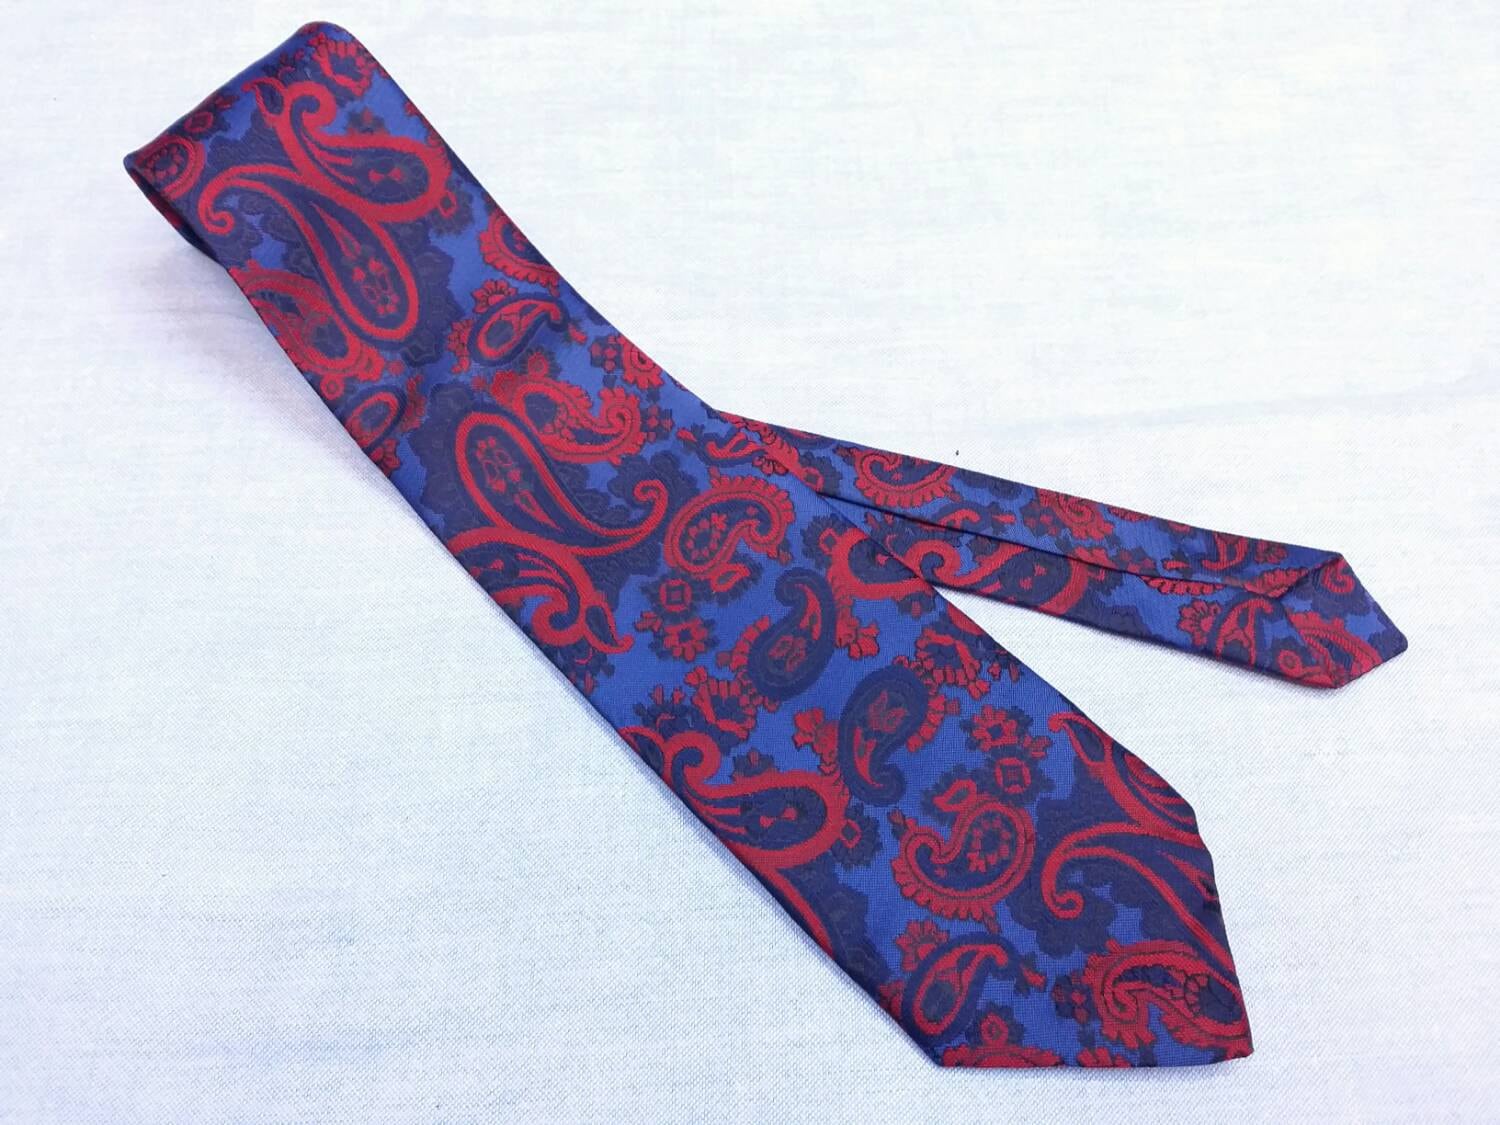 Vintage Givenchy paisley rare design necktie 3.25 by CheAmeVintage